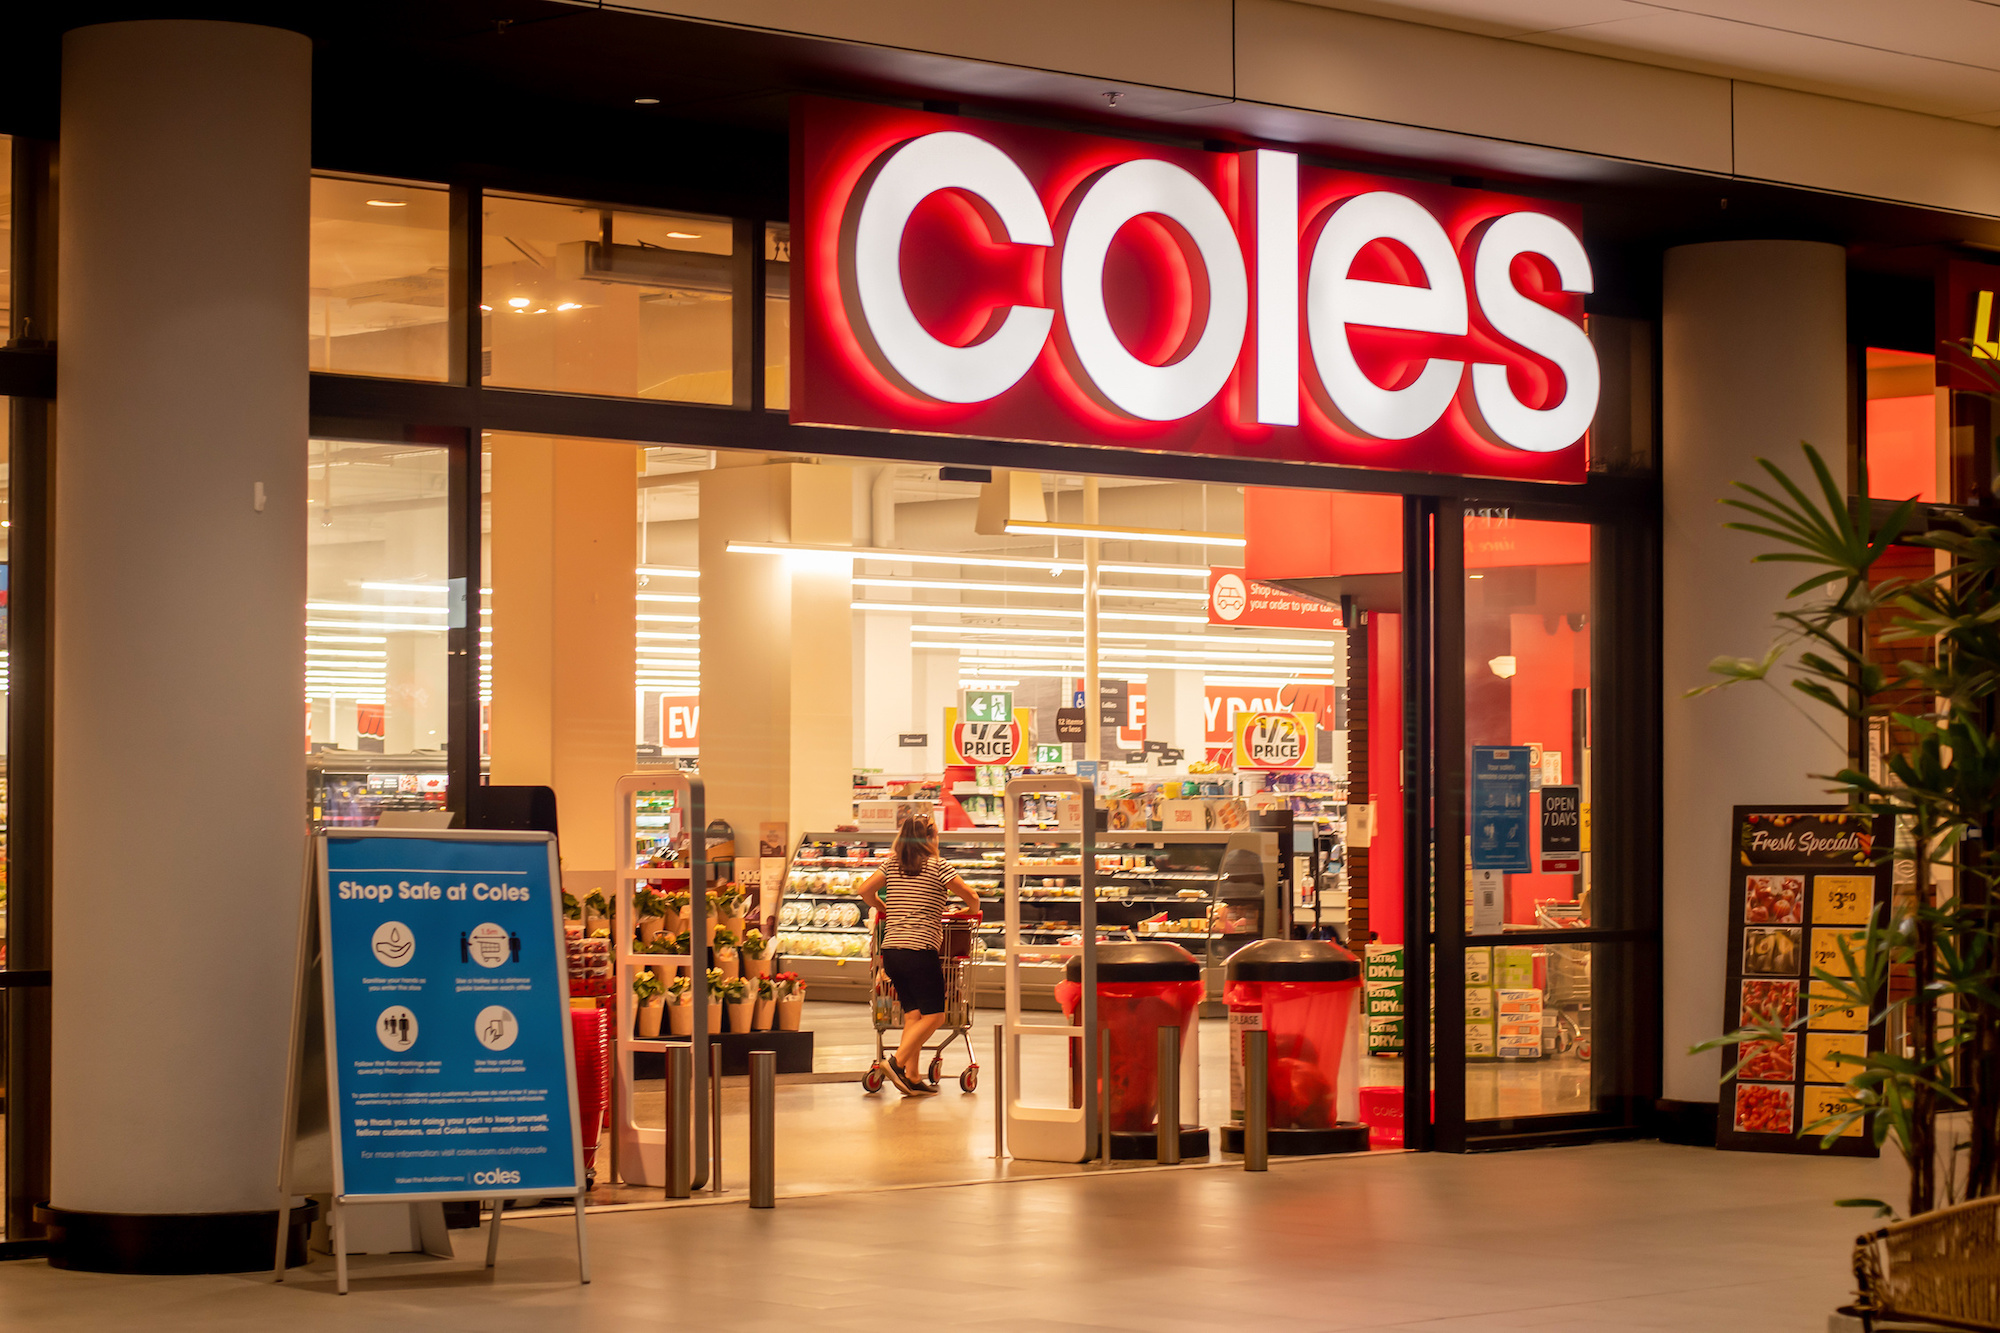 The entrance to a Coles supermarket